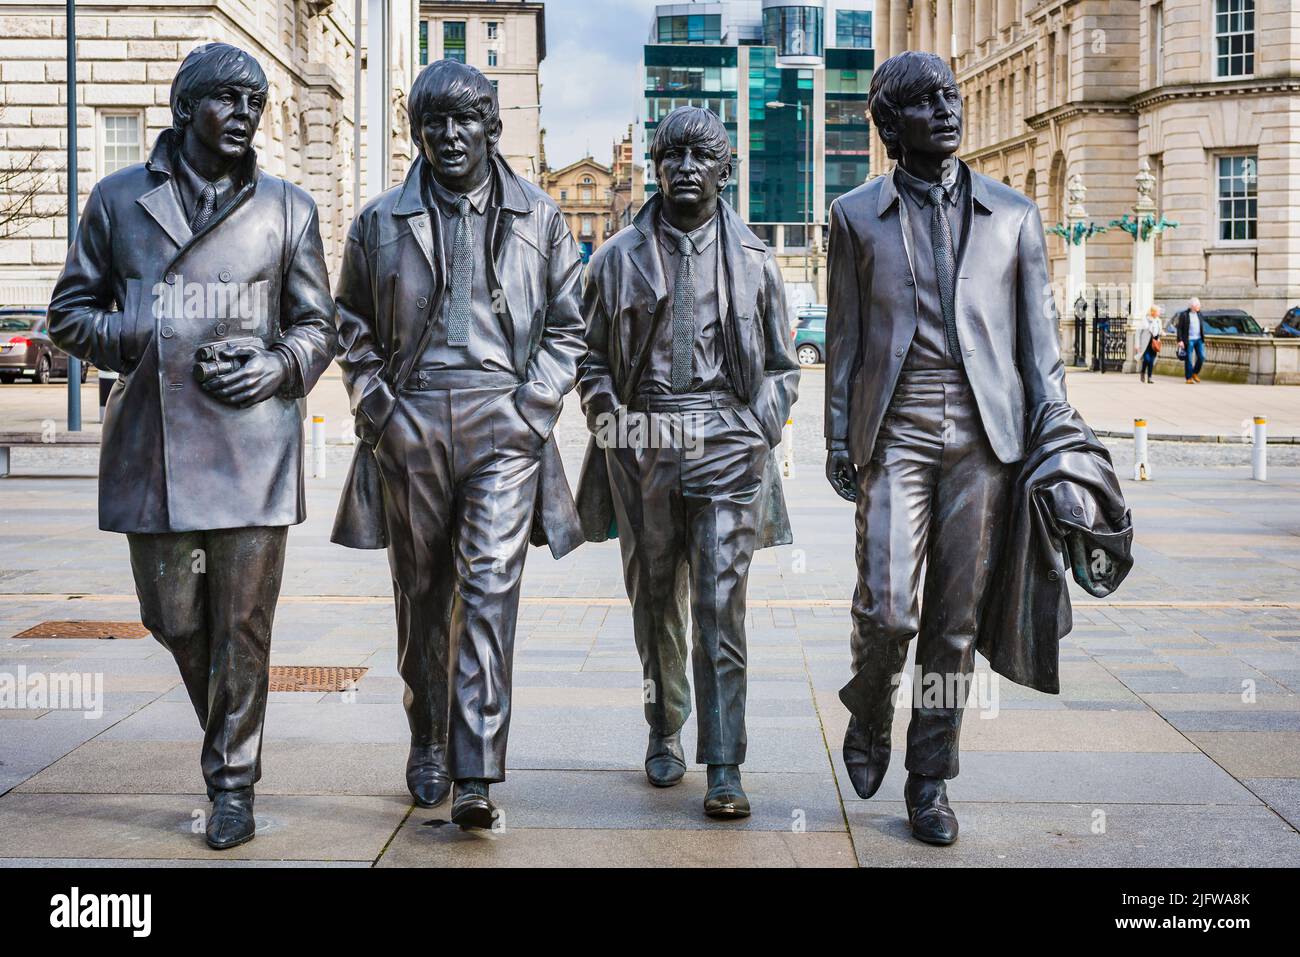 The Beatles statue in their home city Liverpool, at Pier Head on Liverpool waterfront. Leverpool, Merseyside, Lancashire, England, United Kingdom Stock Photo